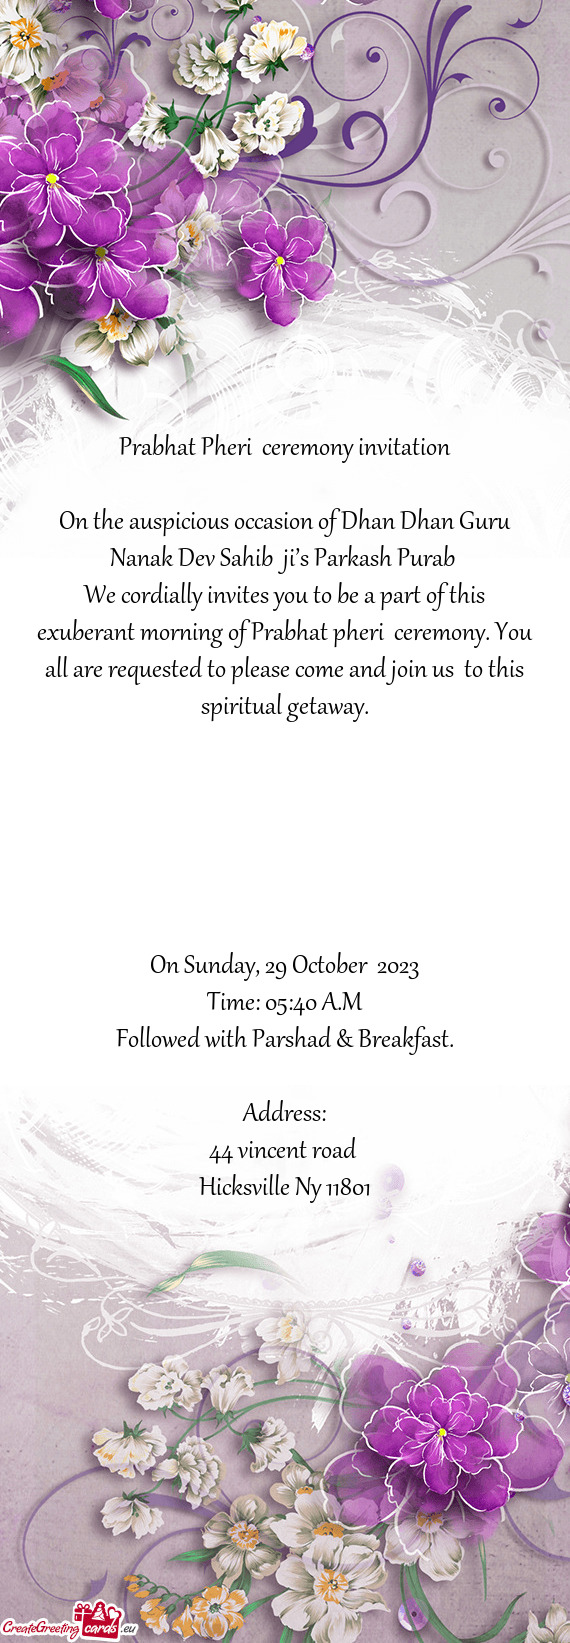 We cordially invites you to be a part of this exuberant morning of Prabhat pheri ceremony. You all